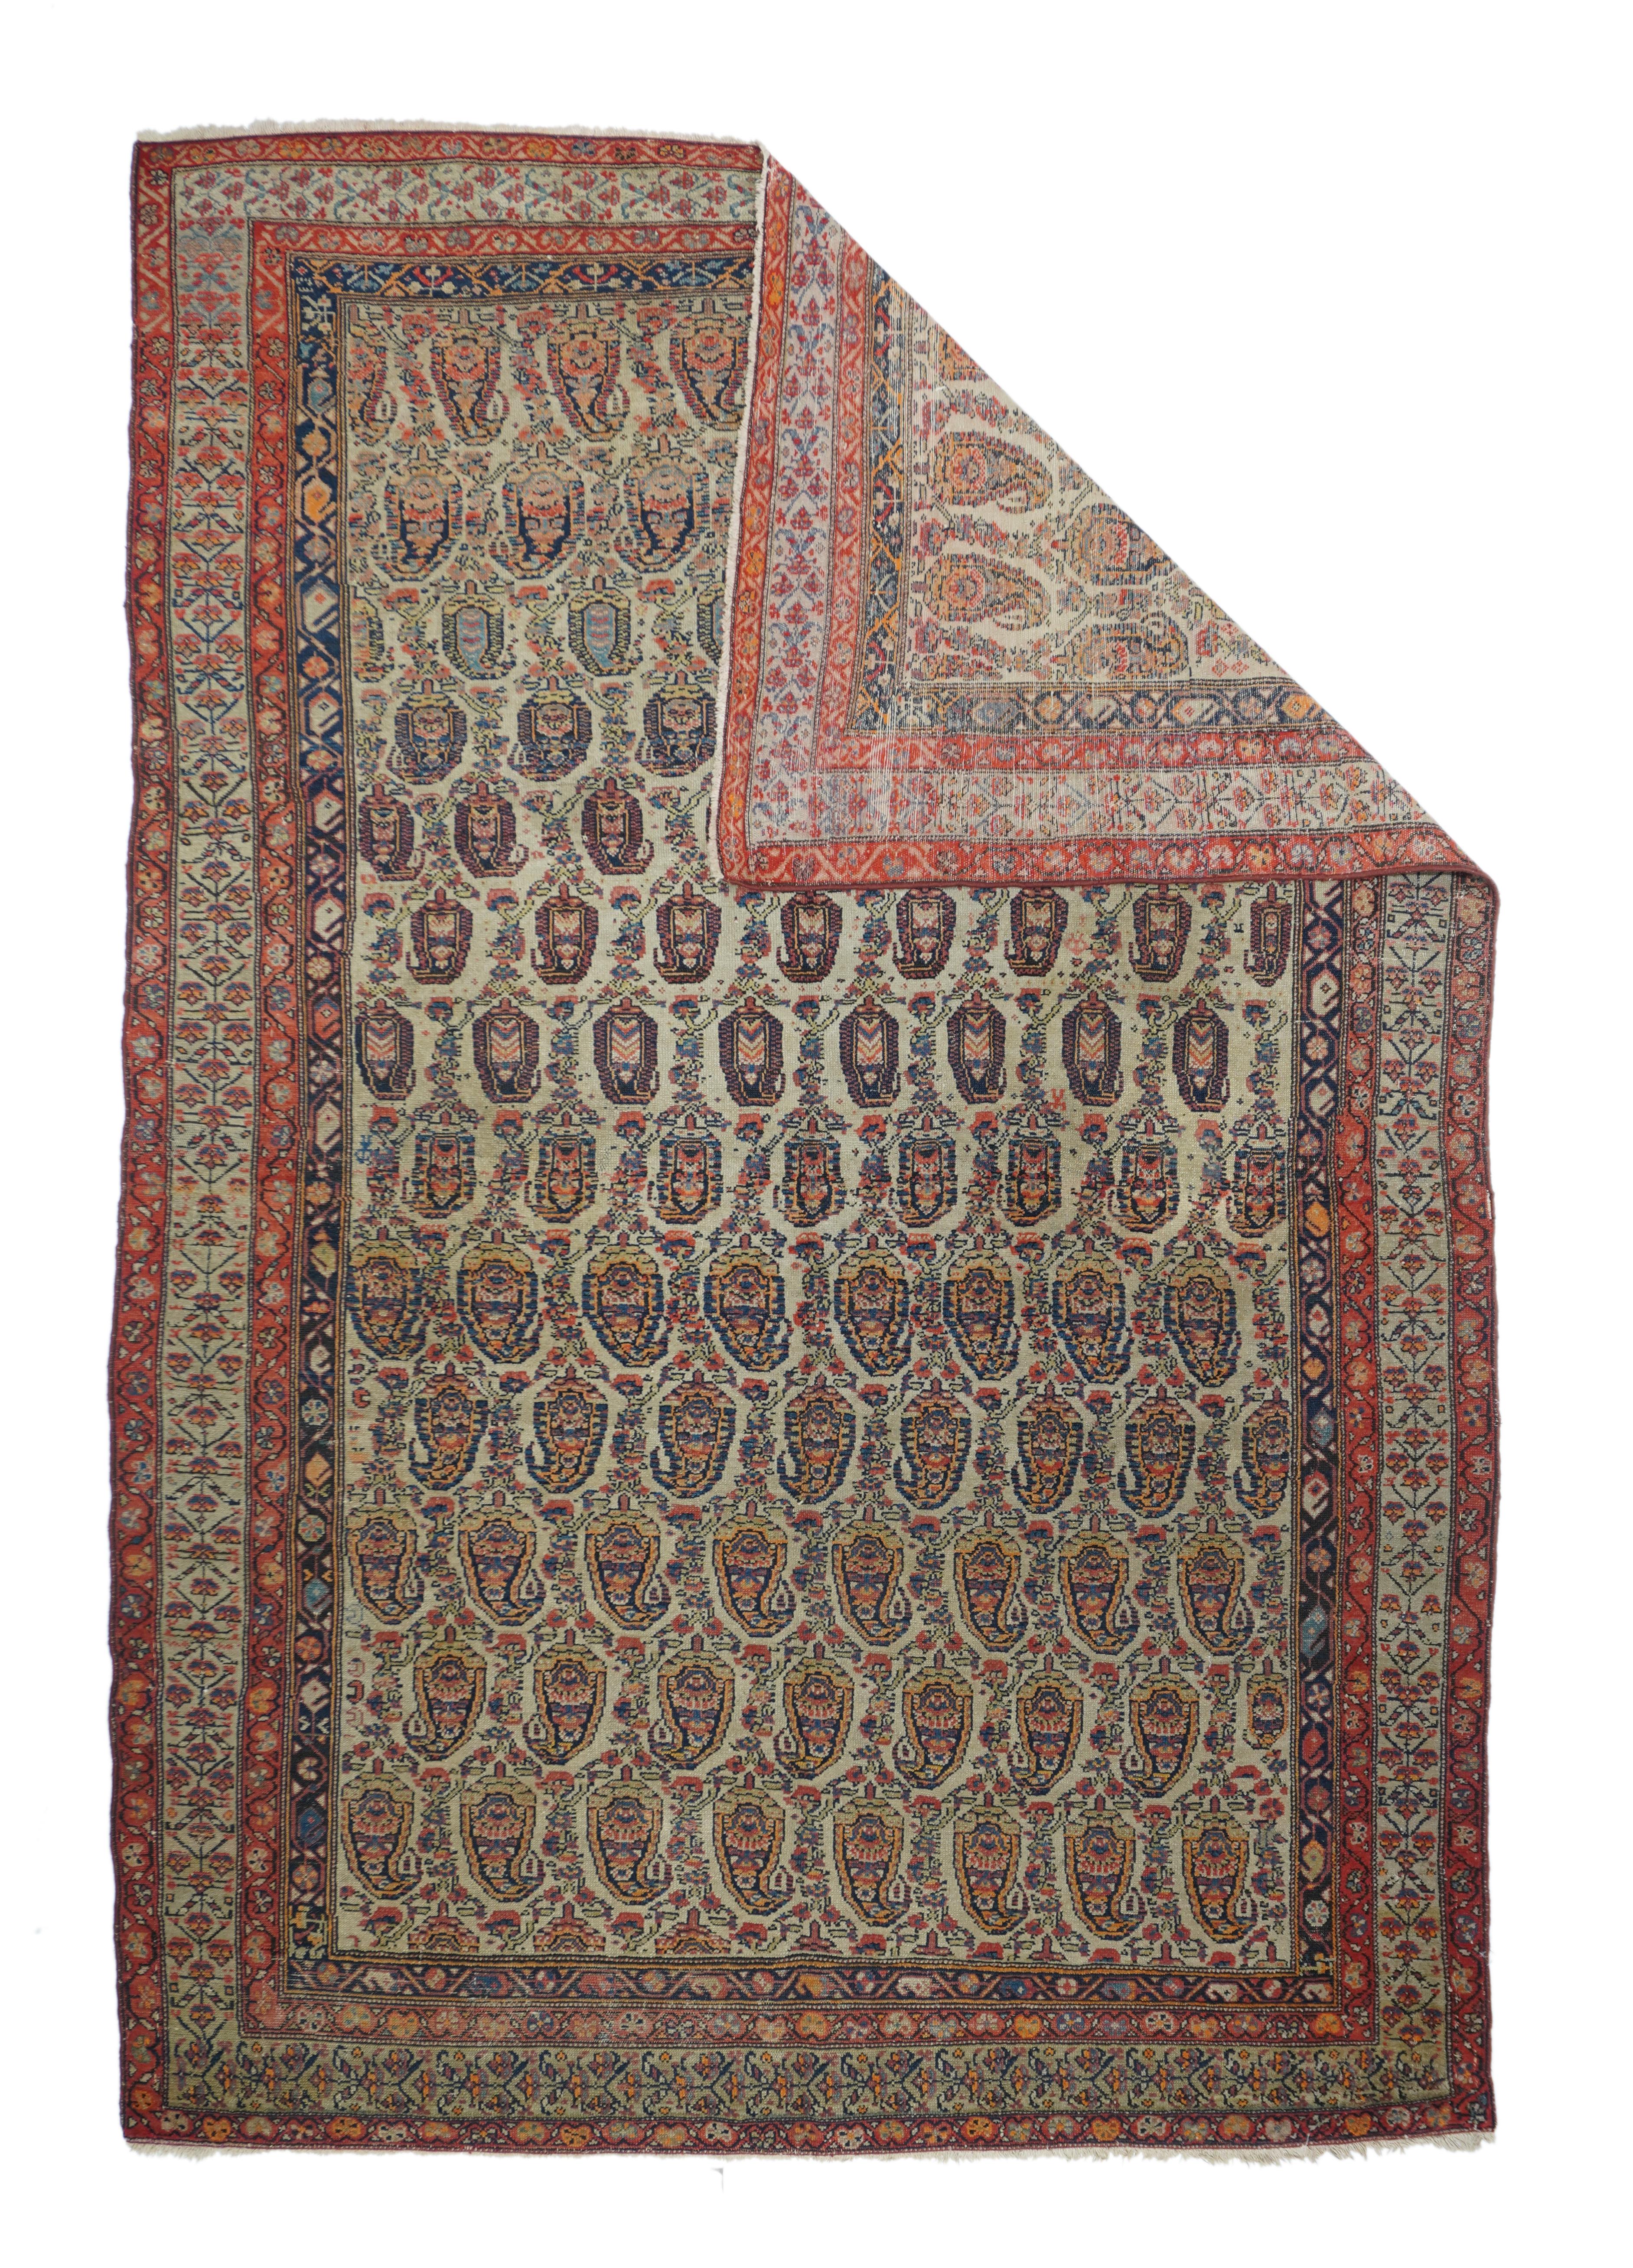 Antique Malayer rug 5'9'' x 8'10''. This west Persian, cotton foundation, symmetrically knotted large scatter features a warm ecru field with reversing rows of floriated botehs set with a lightly drawn flower garland trellis. The botehs change color